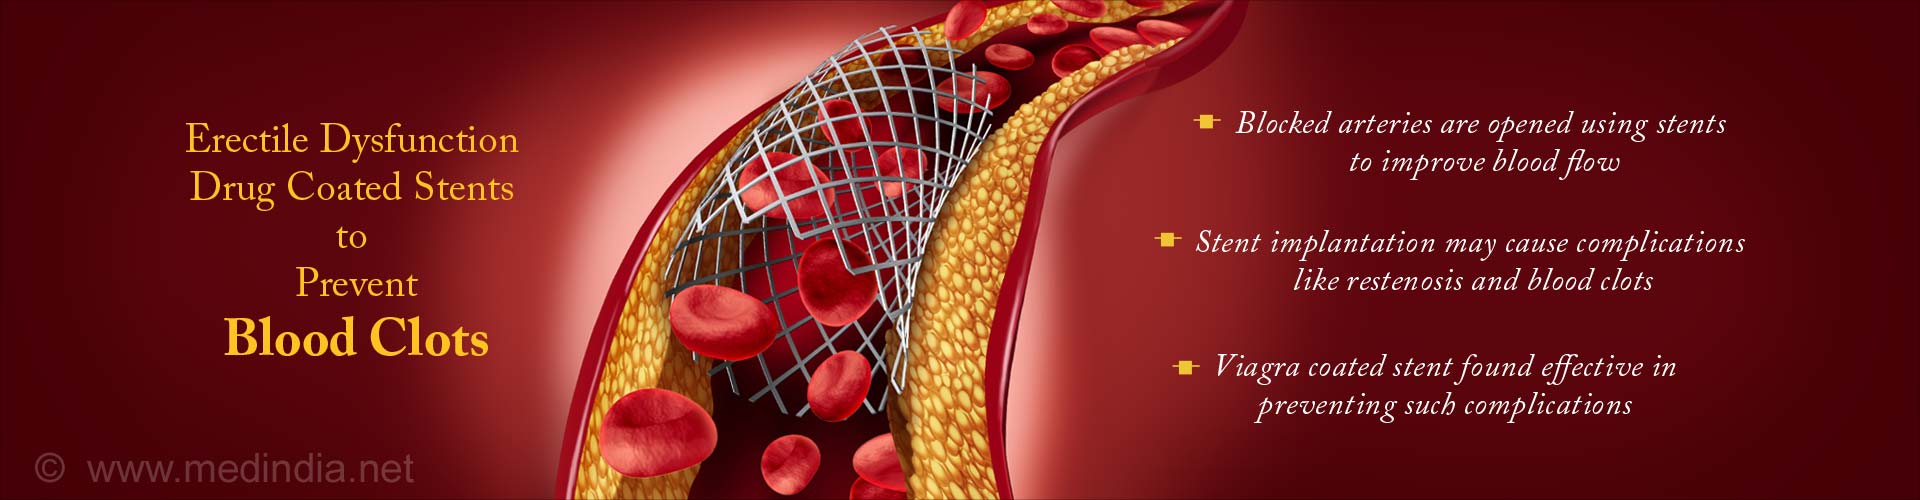 Erectile Dysfunction Drug Coated Stents to Prevent Blood Clots
- Blocked arteries are opened using stents to improve blood flow
- Stent implantation may cause complications like restenosis and blood clots
- Viagara coated stent found effective in preventing such complications